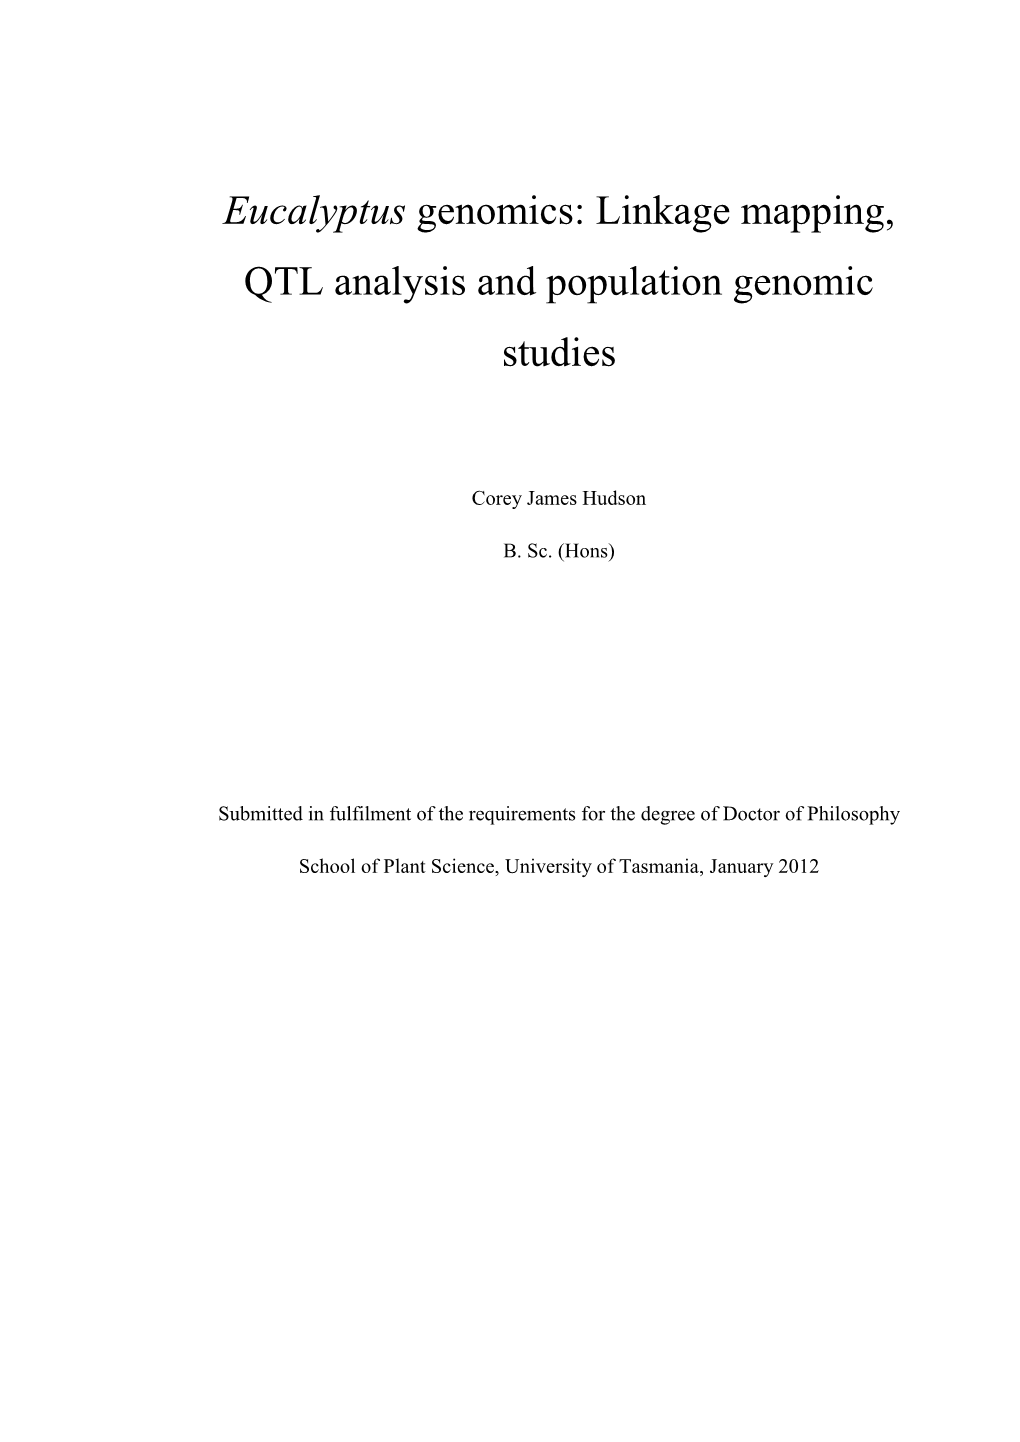 Linkage Mapping, QTL Analysis and Population Genomic Studies